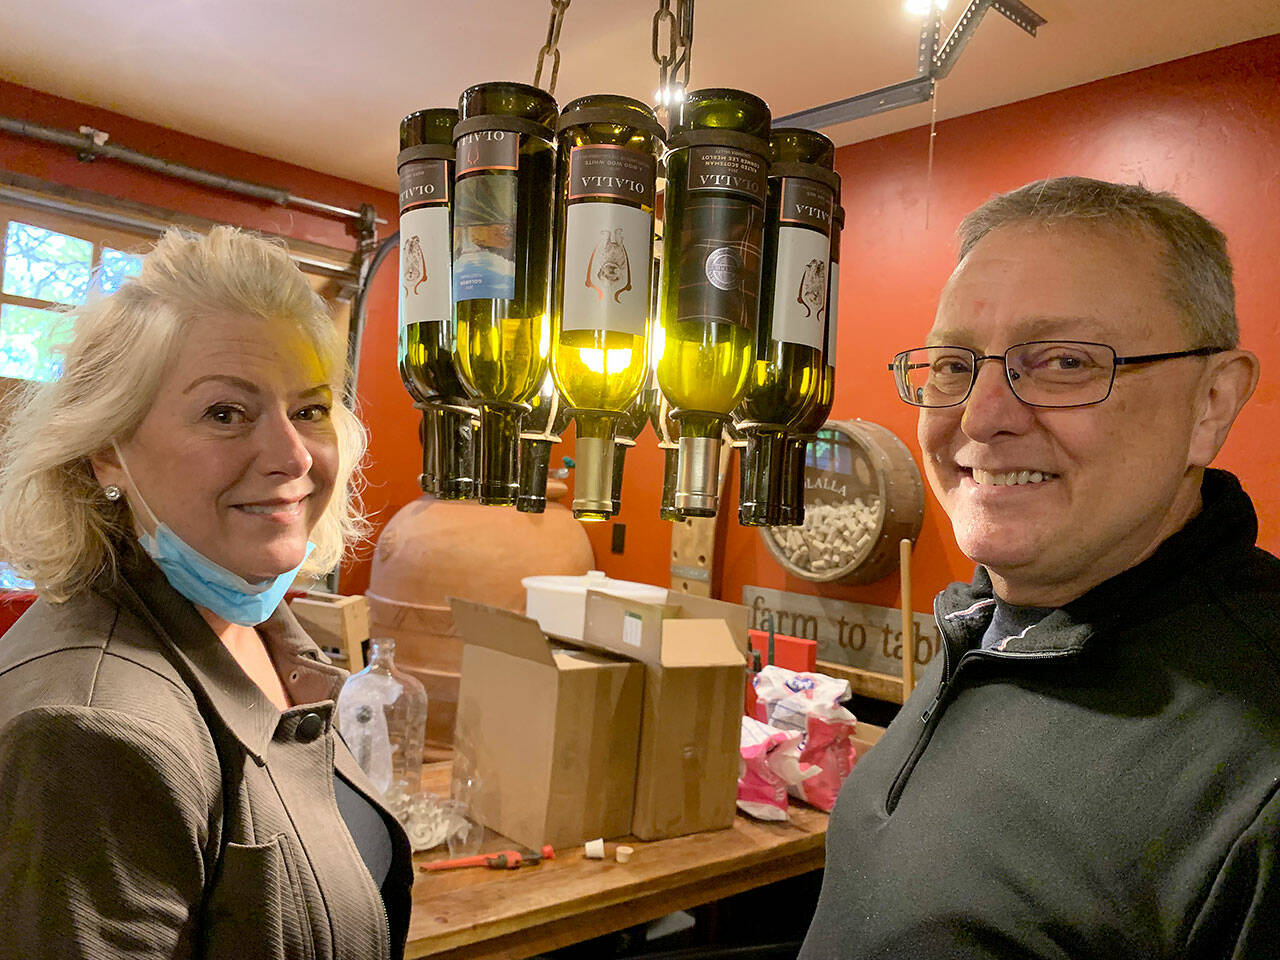 The couple has created wine labels that feature their canine pets, past and present (shown attached to wine bottles that make up a lamp). (Bob Smith | Kitsap Daily News)